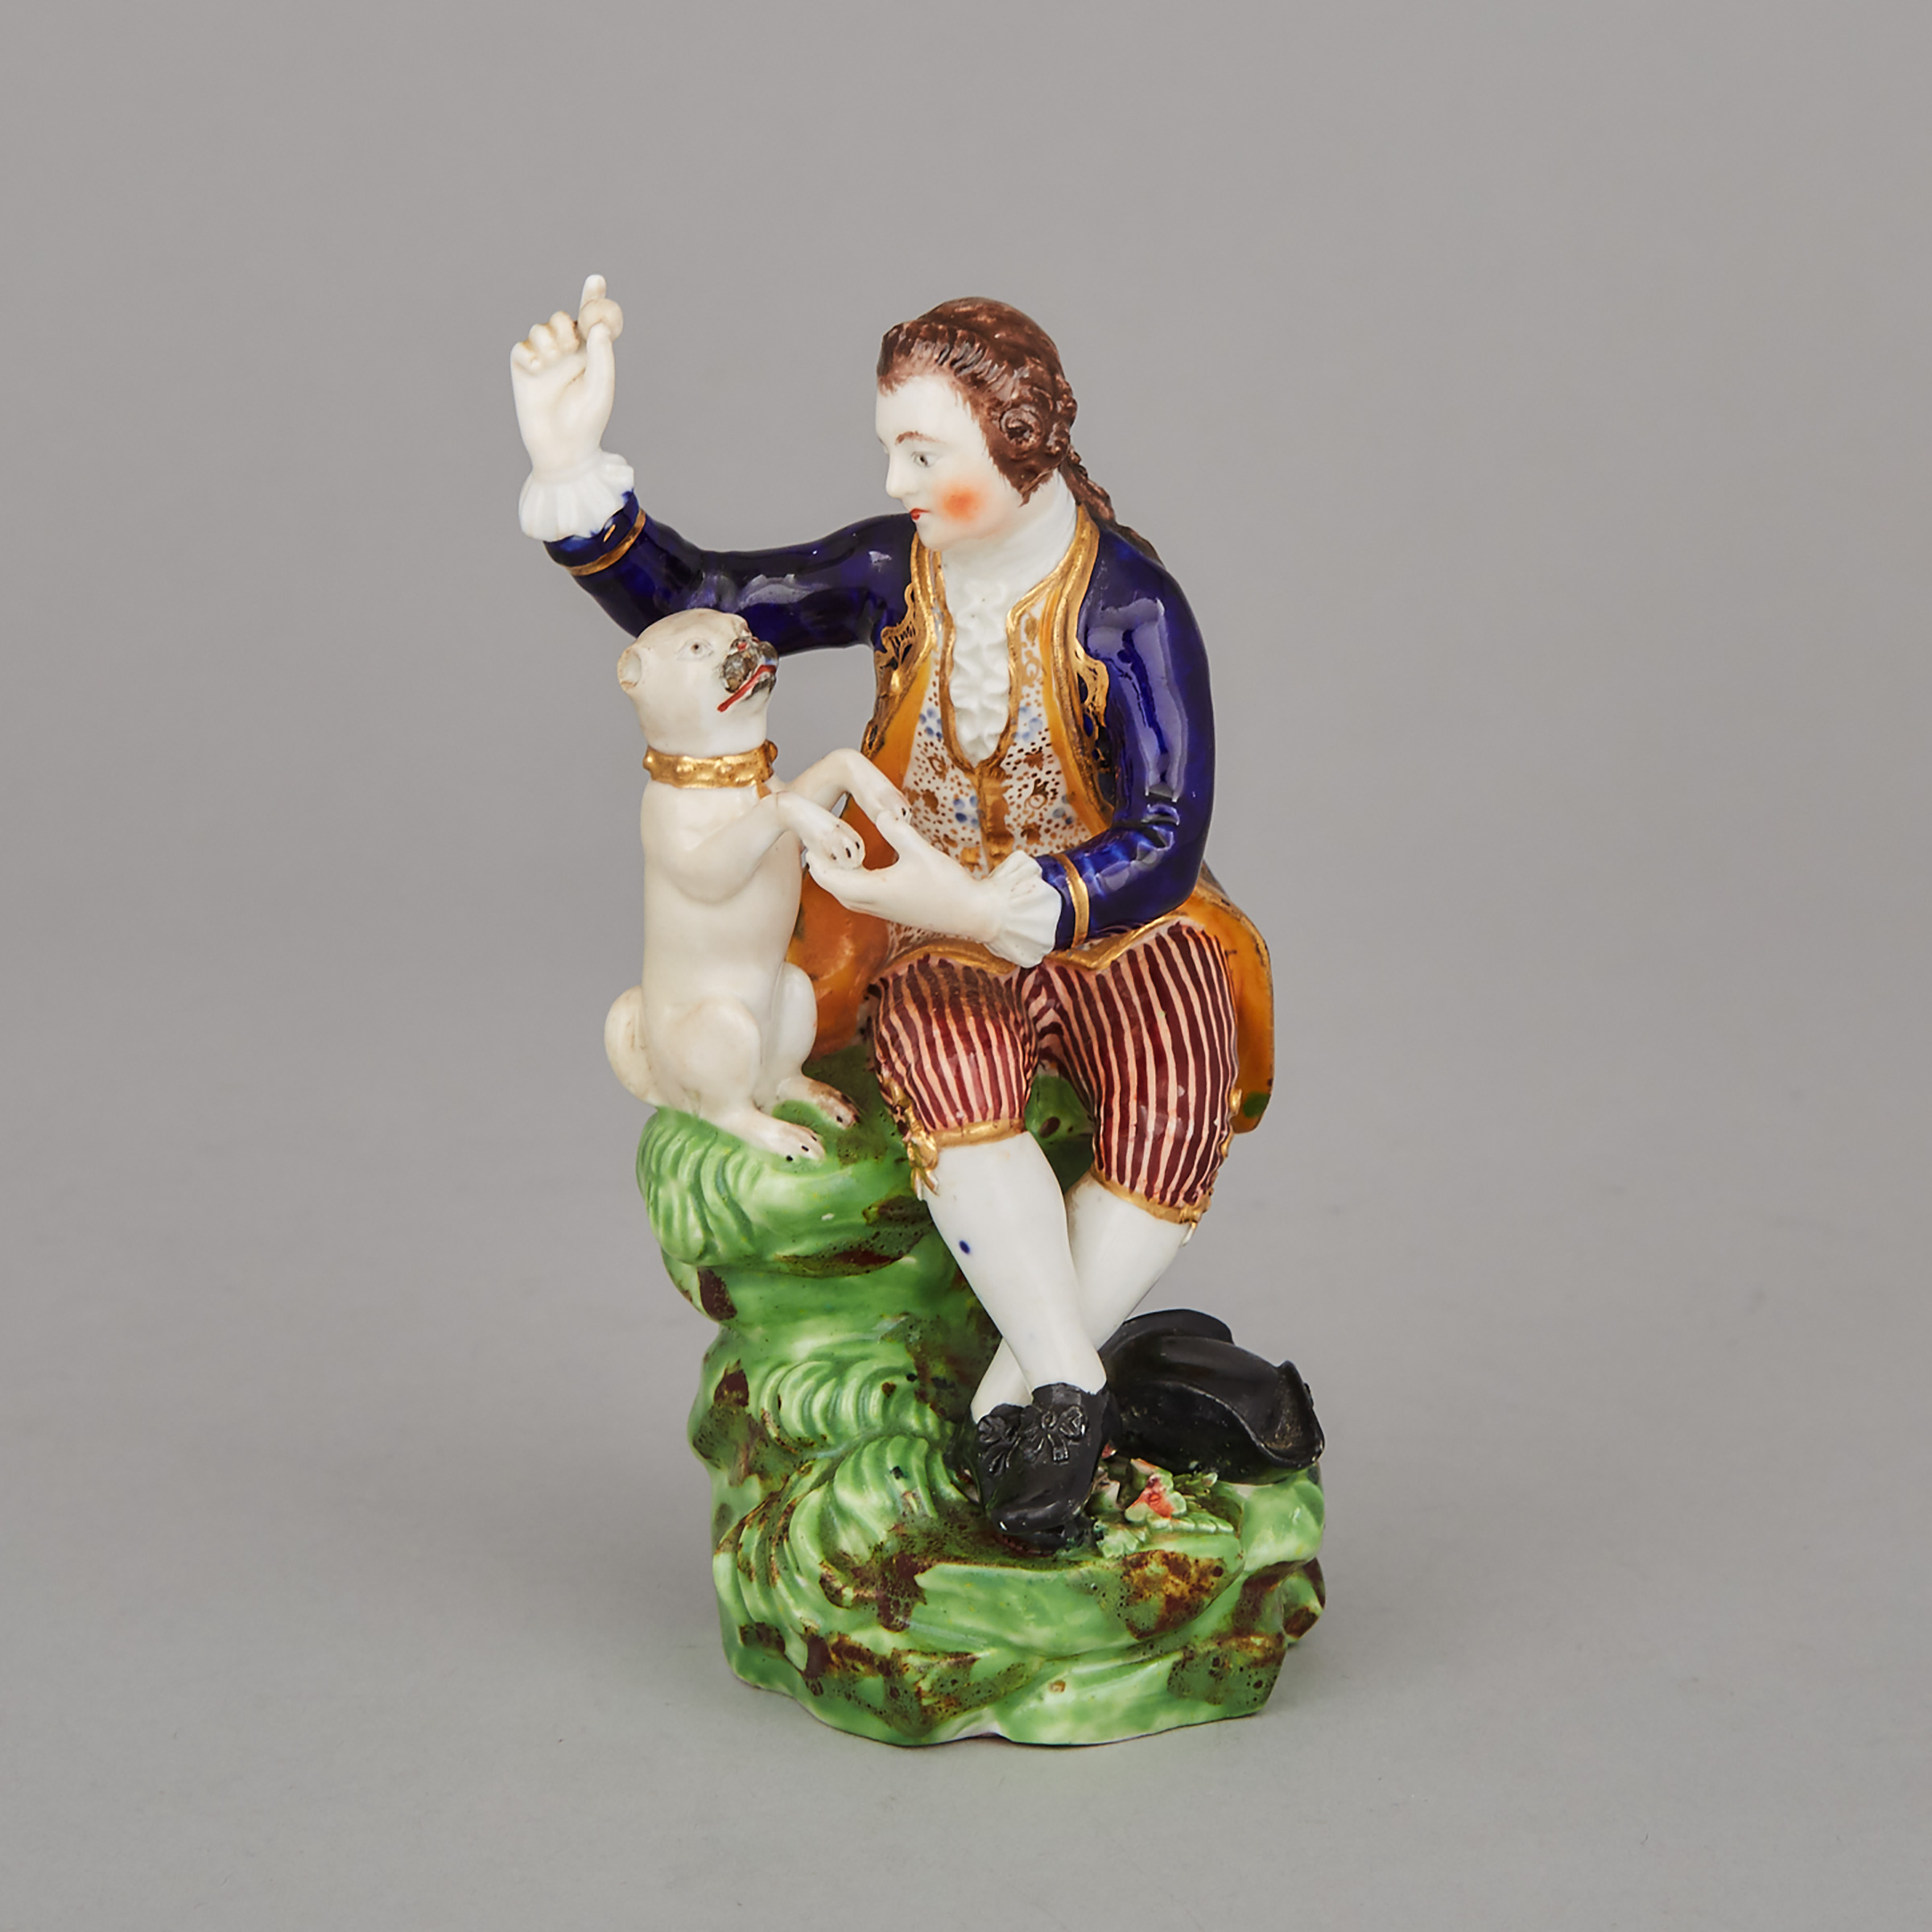 Bloor Derby Figure of a Seated Man with Pug Dog, c.1820